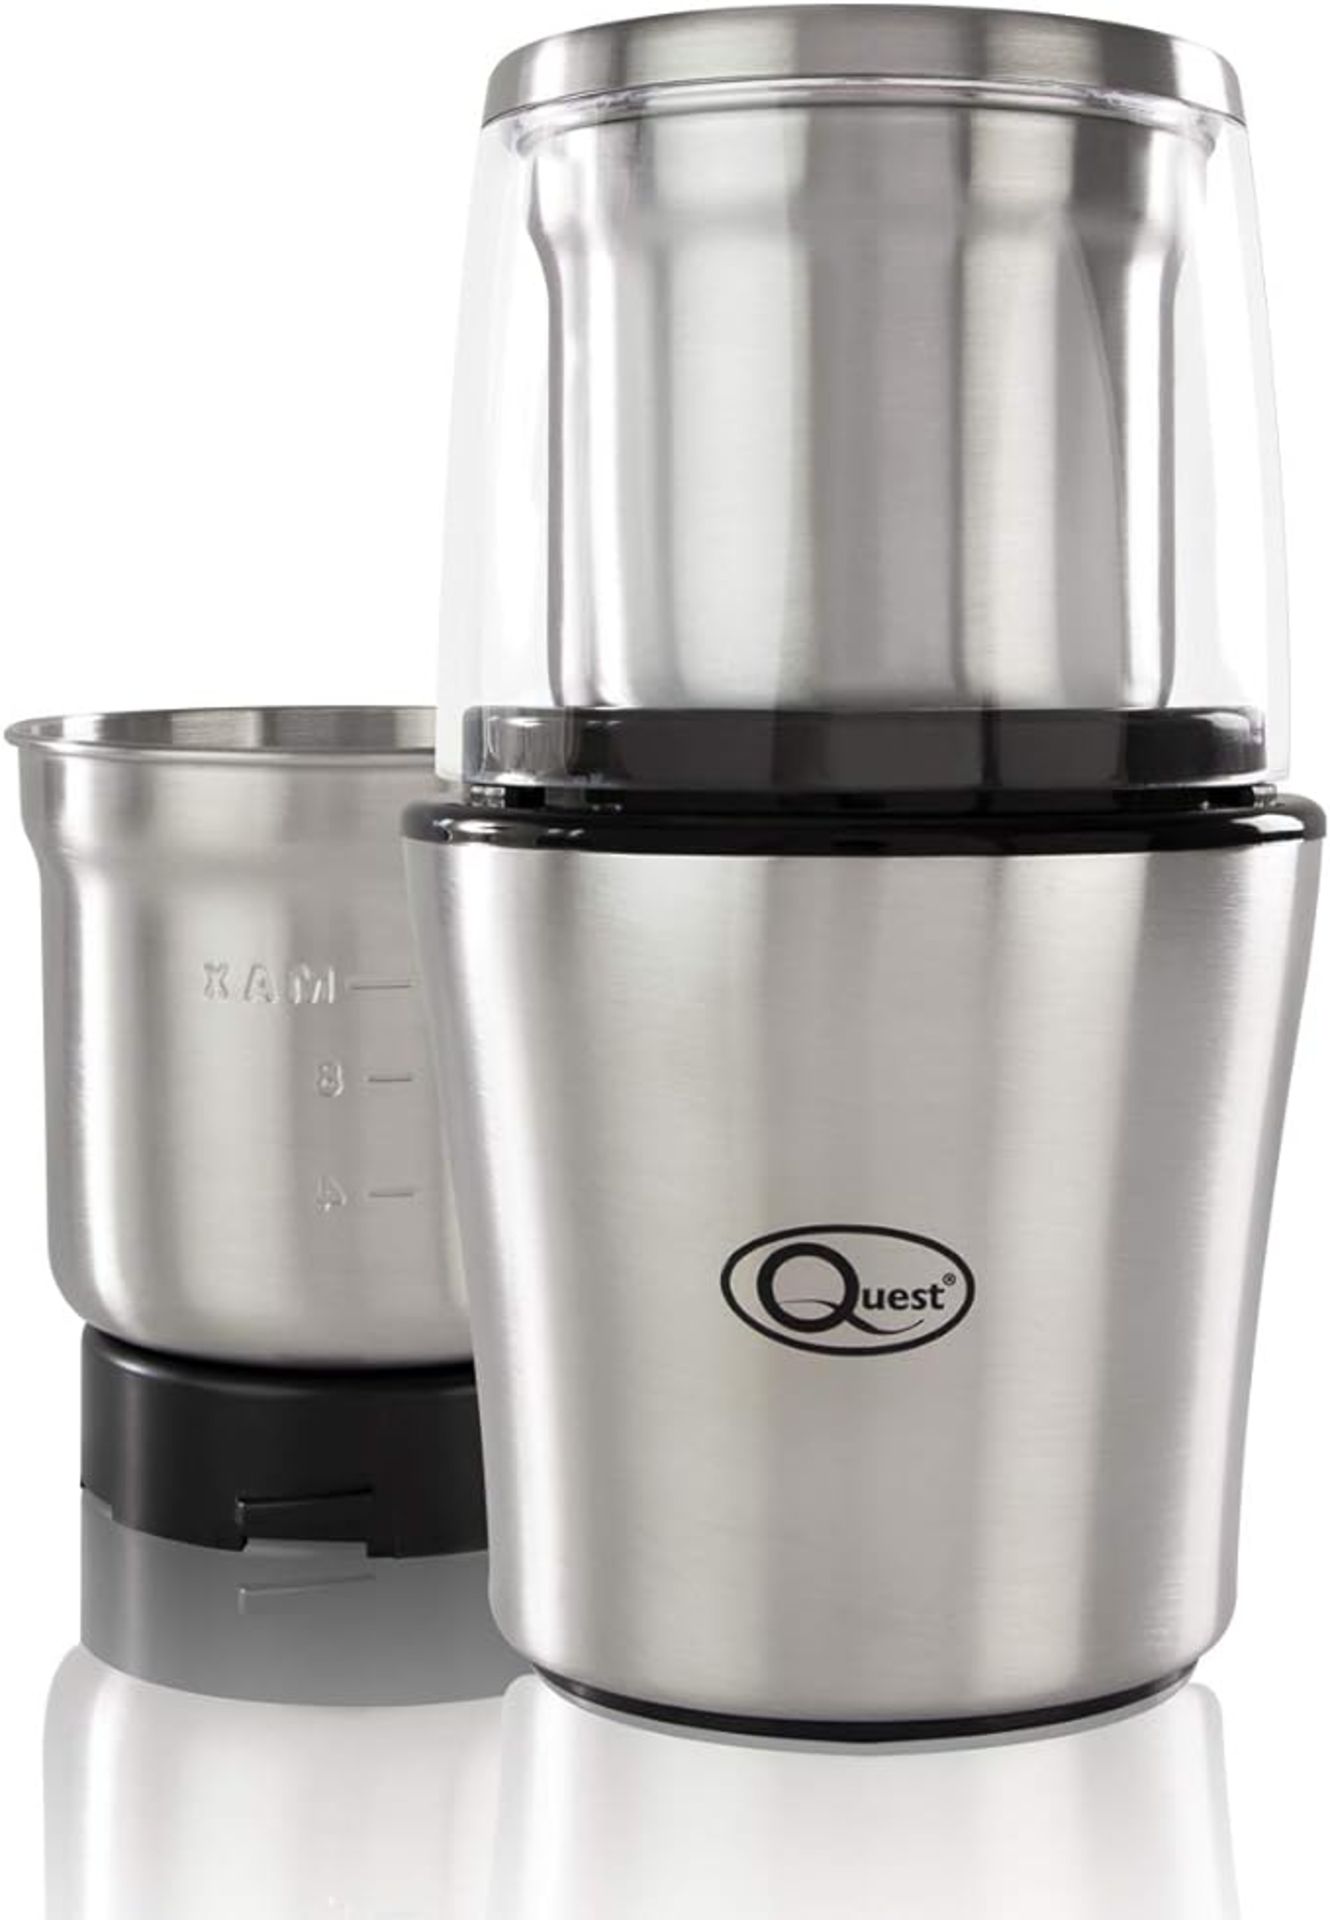 5 x Quest 34170 Electric Wet and Dry Grinder / One Touch Operation / Coffee, Spices, Nuts, Fruit,